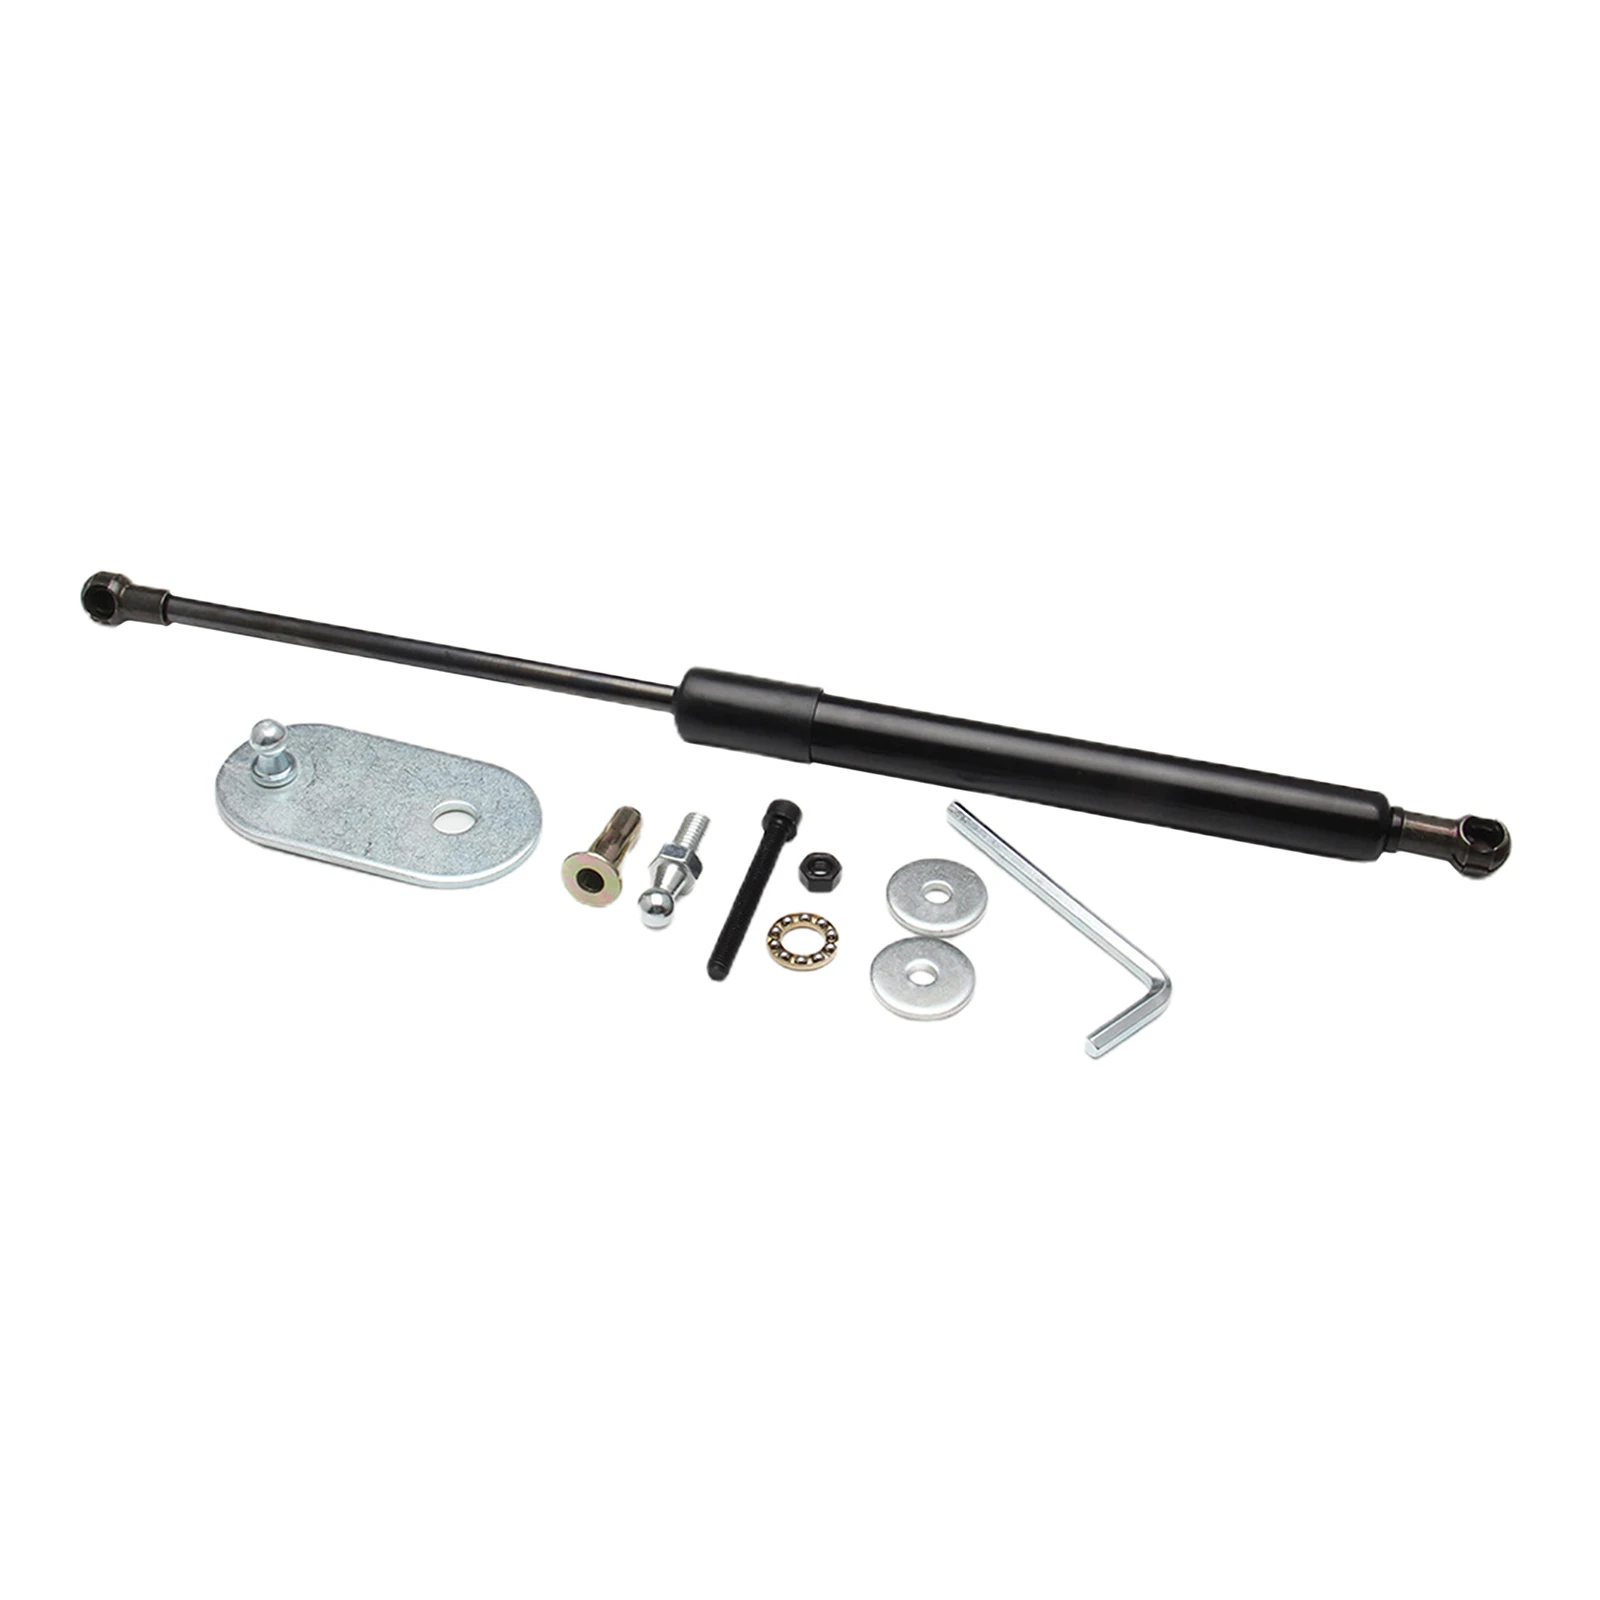 Truck Tailgate Assist Shock Struts Bar Lift Support for Ford F-150 2004-2014